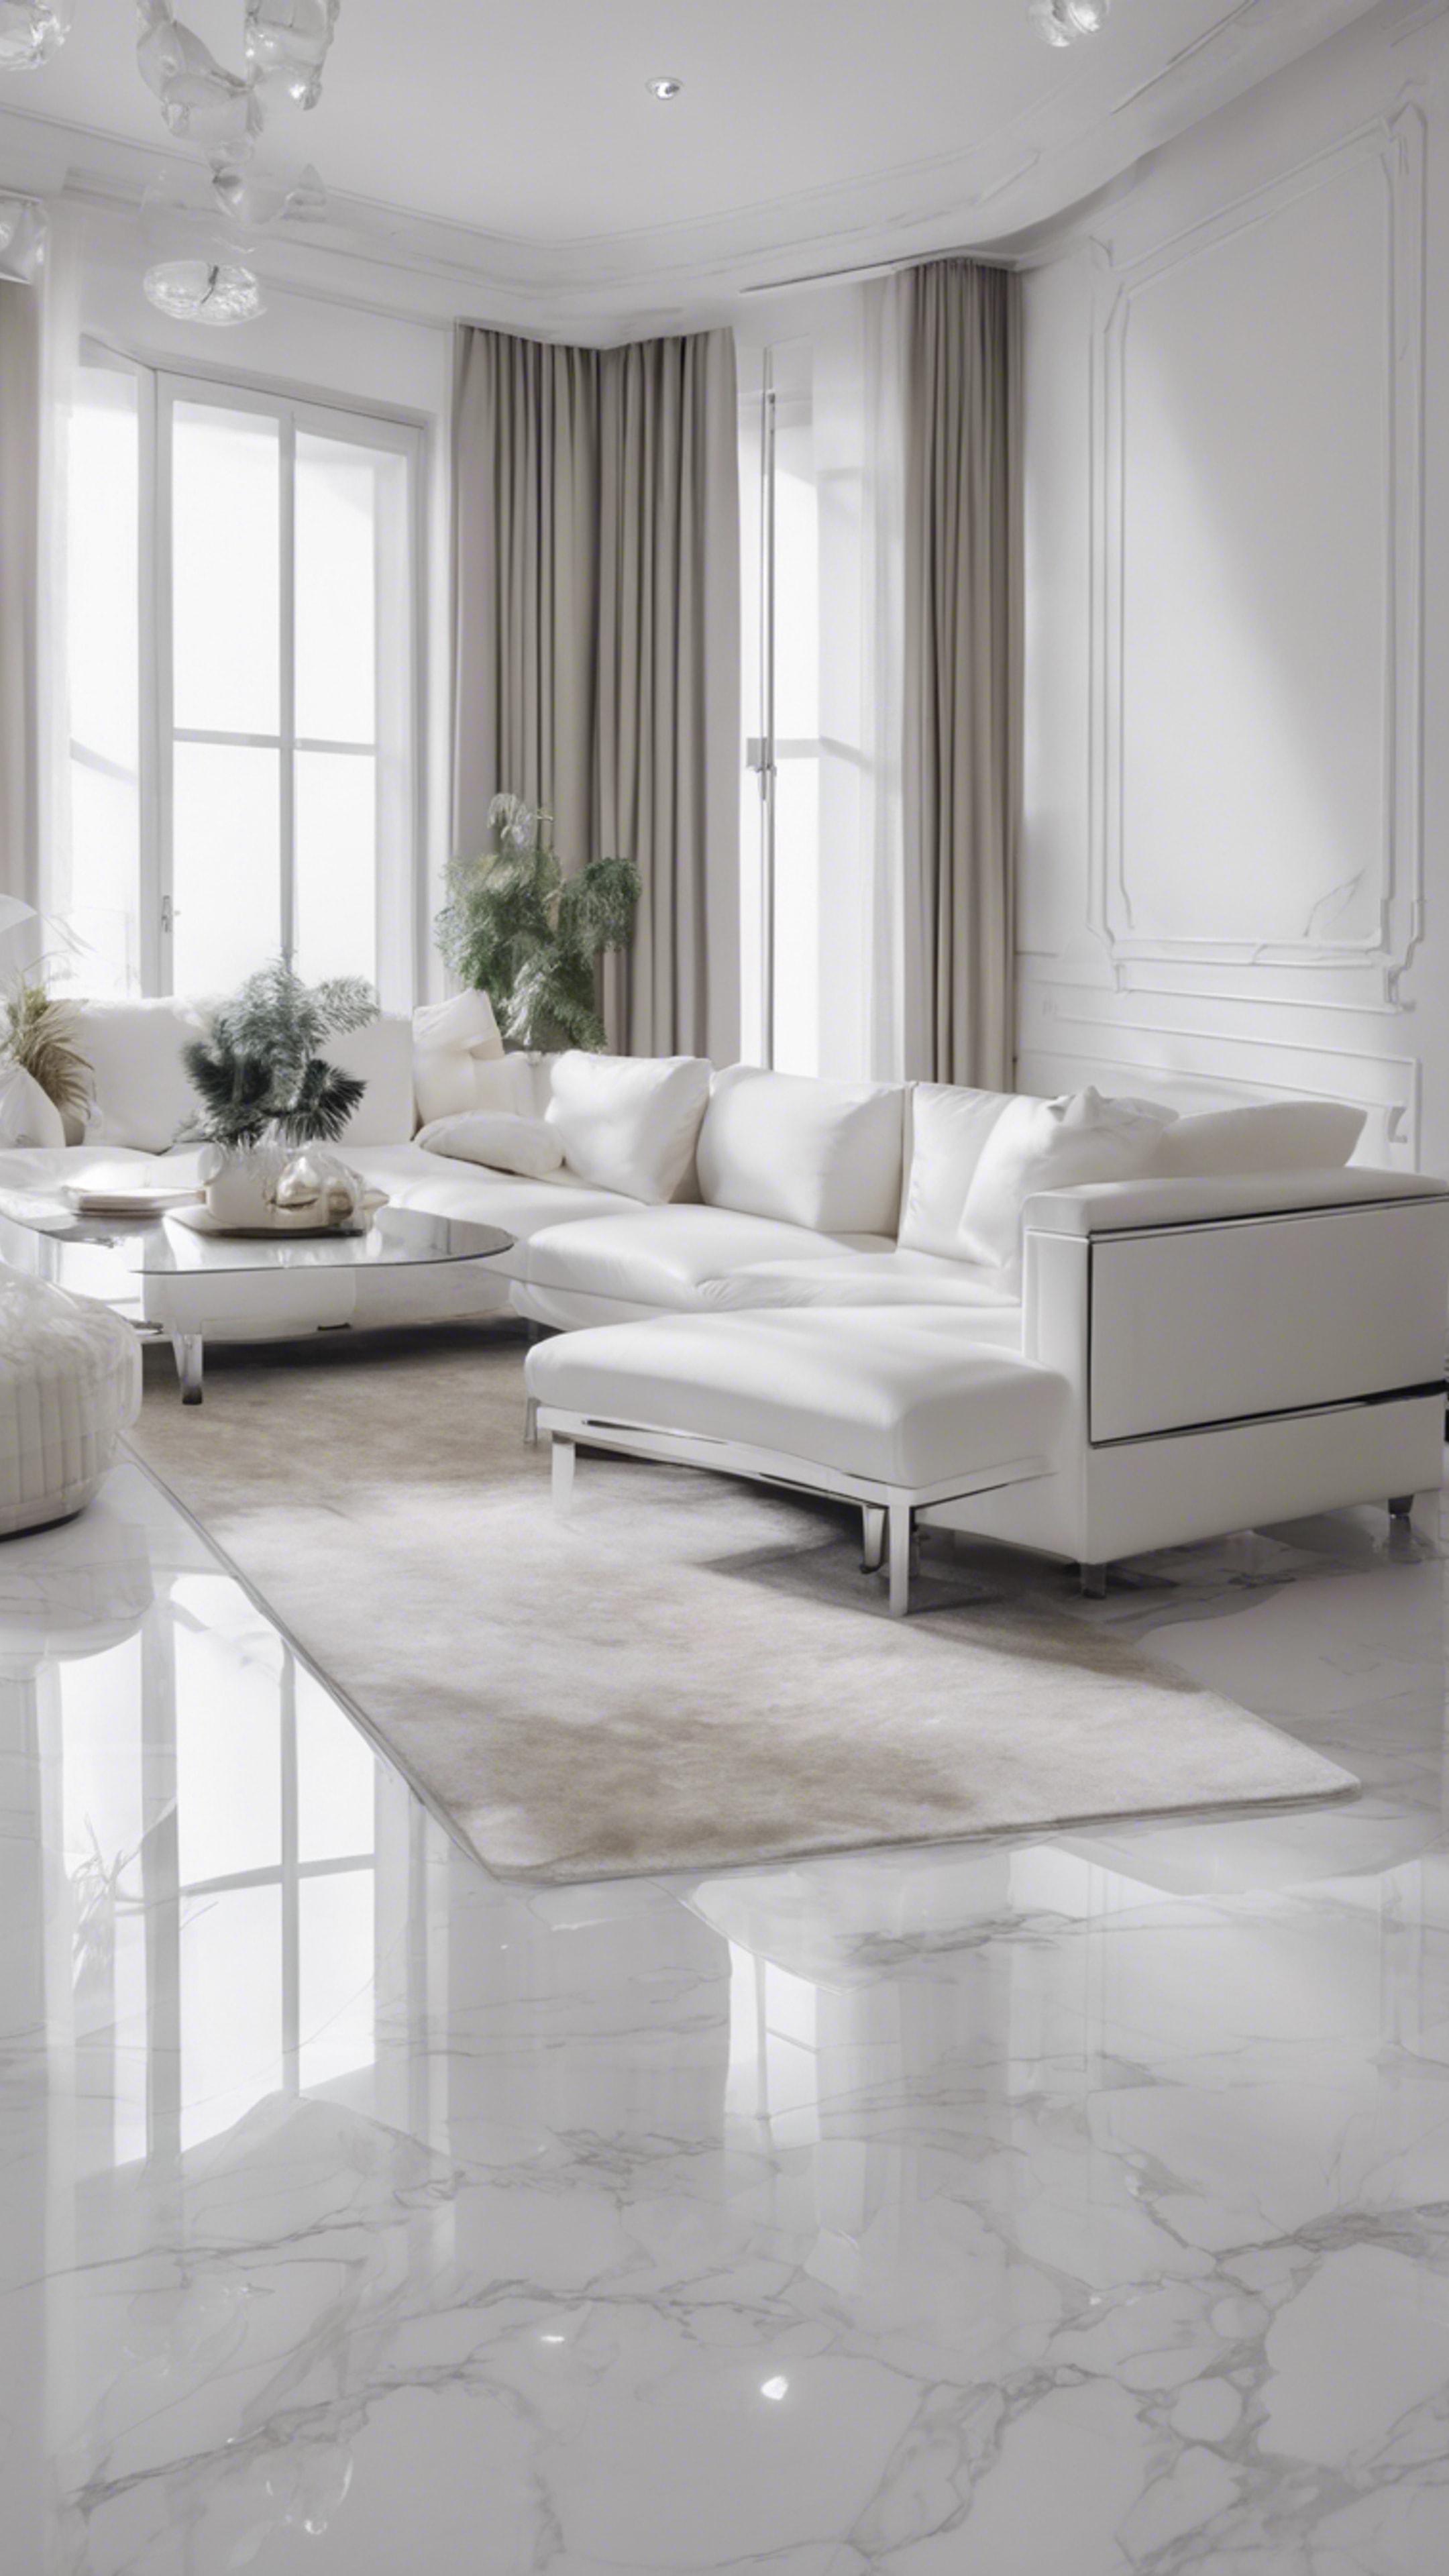 An ultra-modern minimalist interior design of a living room, with cool white walls, silver furniture and white marble floors. 墙纸[0b803decb0d241b99c2a]